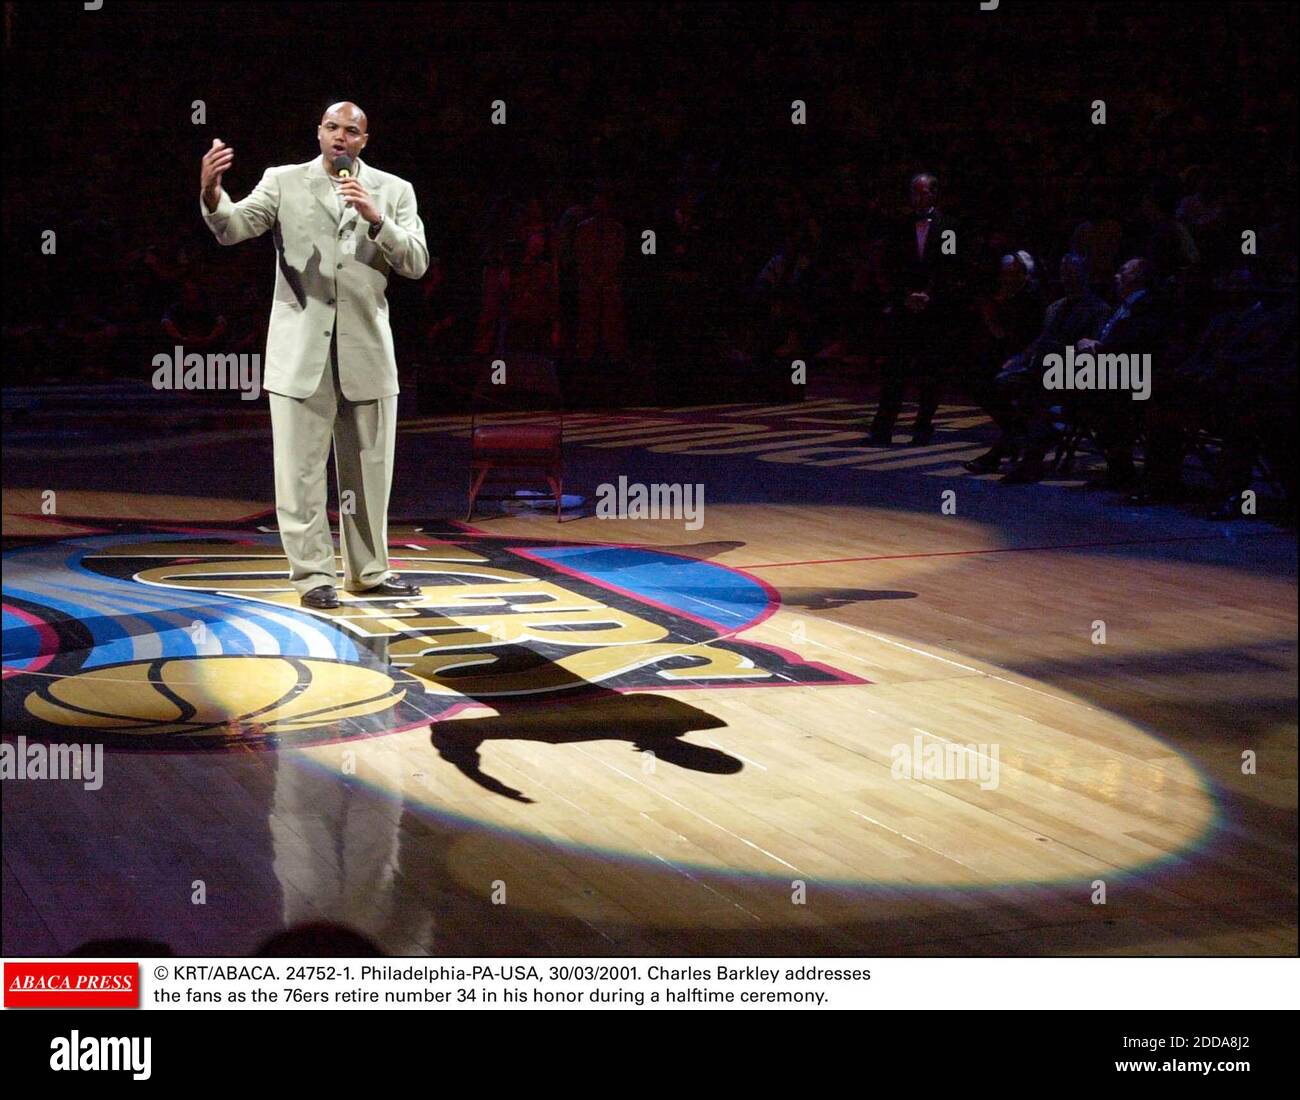 CHECK OUT SIXERS RETIRING CHARLES BARKLEY'S 34 IN 2001!